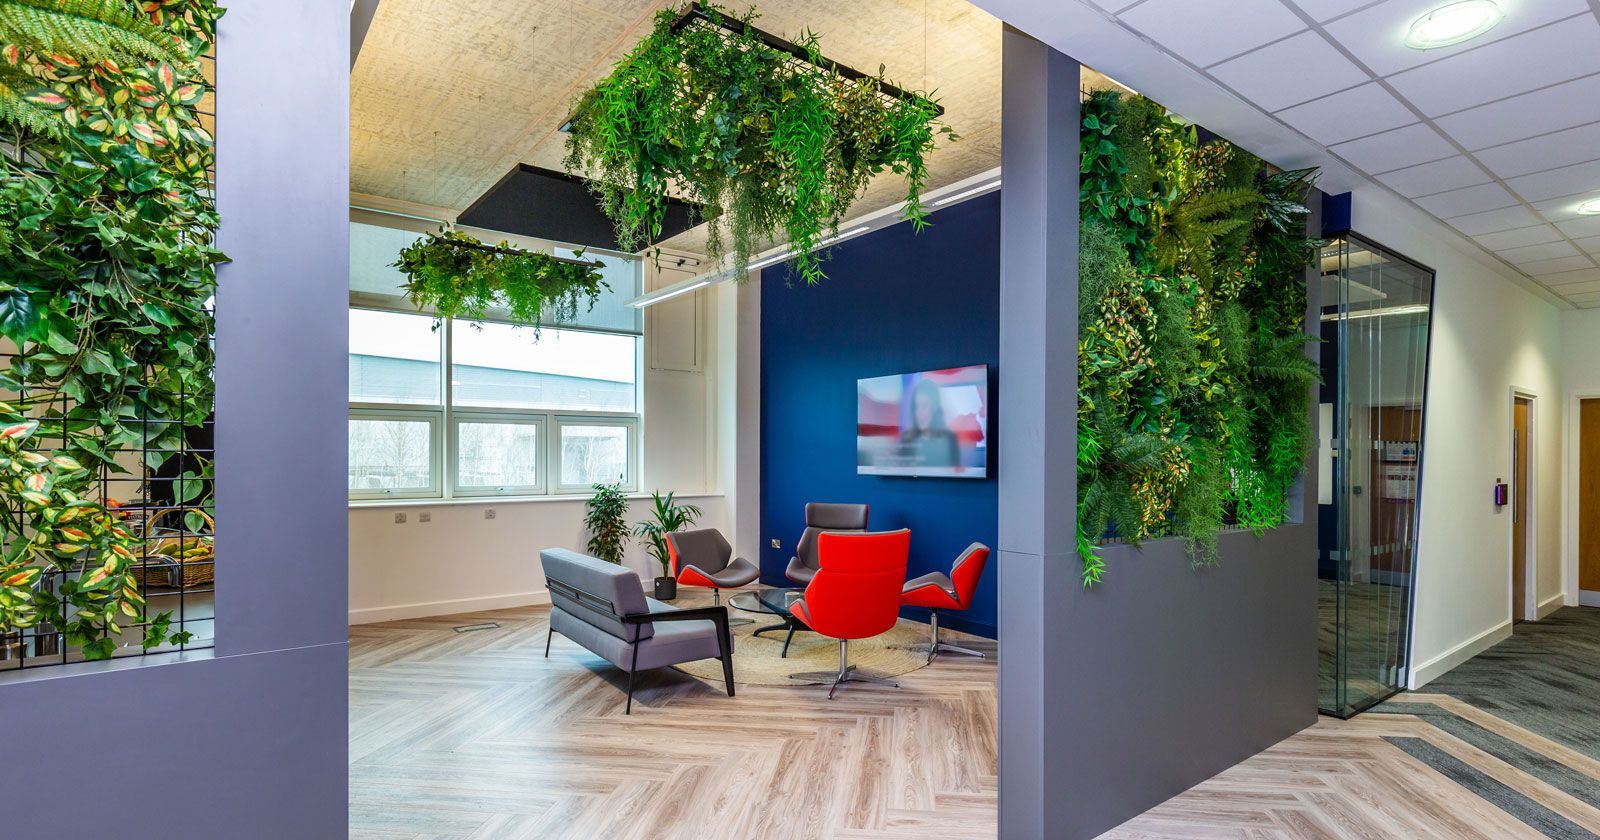 Iceotope Kitchen and Break out Areas with Biophilic Walls Designed and Installed by APSS